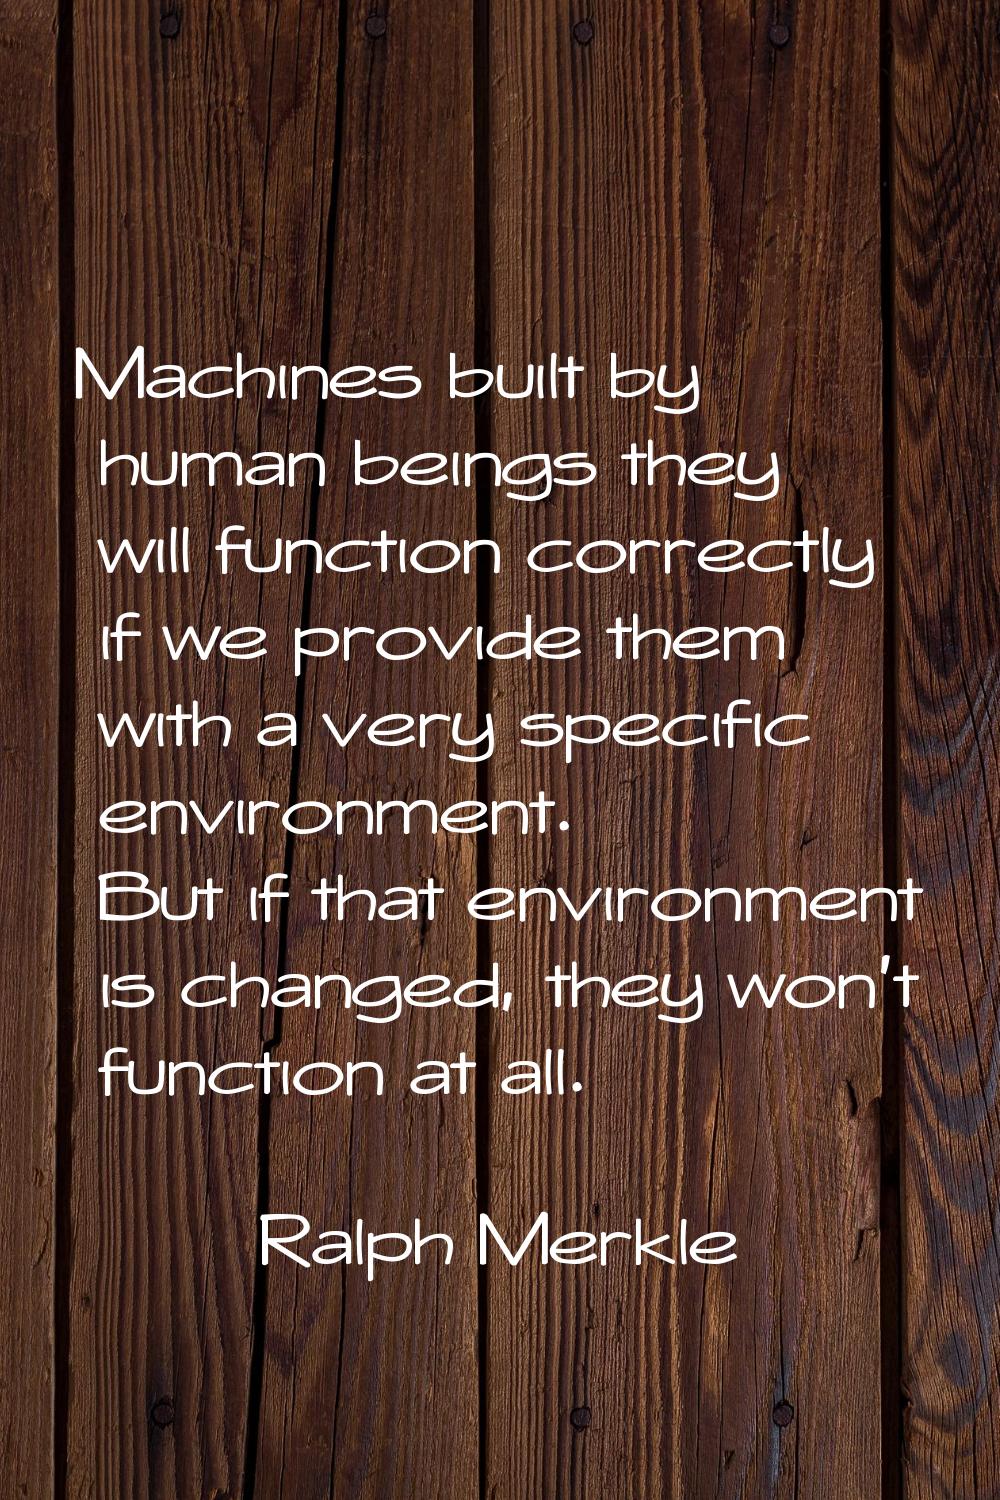 Machines built by human beings they will function correctly if we provide them with a very specific